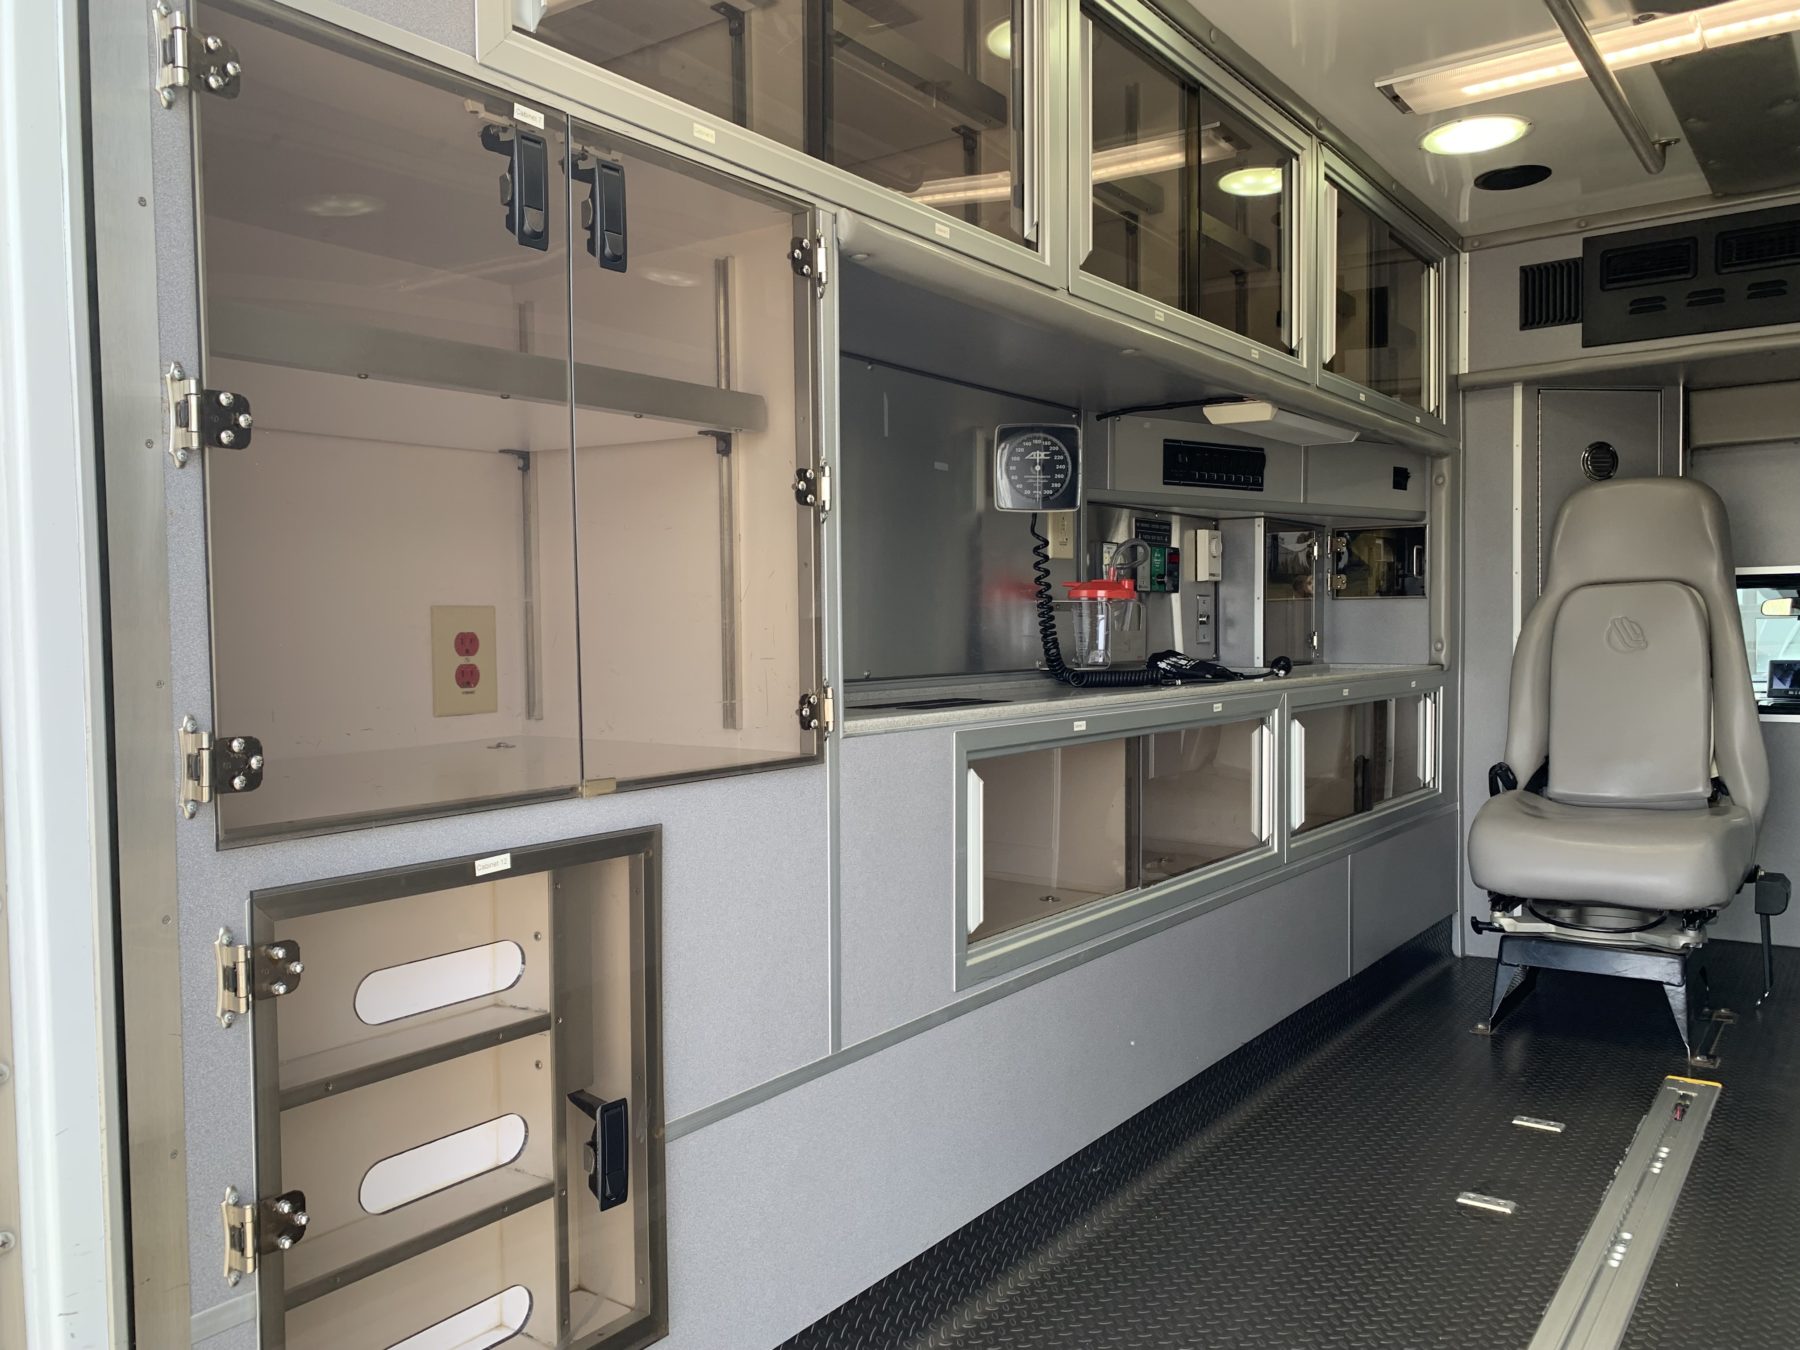 2014 Ram 4500 4x4 Heavy Duty Ambulance For Sale – Picture 10